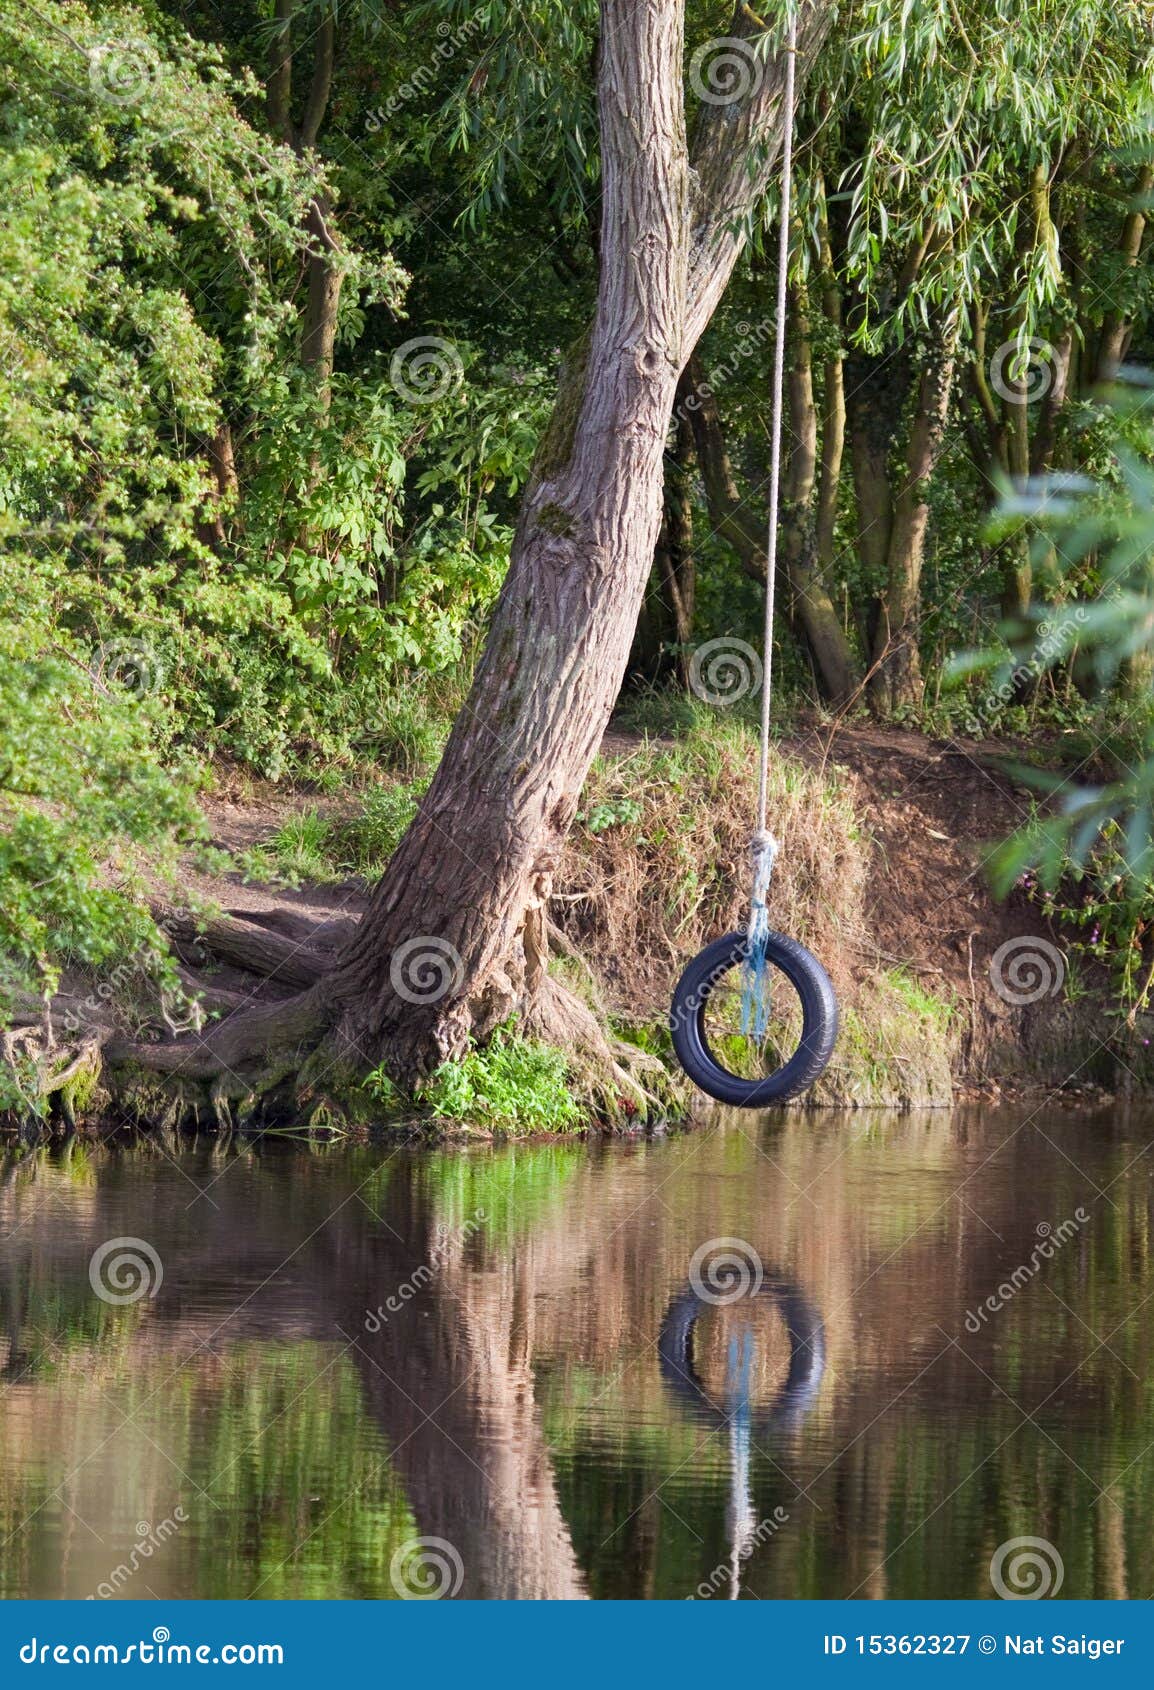 Tyre rope swing on river stock image. Image of toys, tyre - 15362327